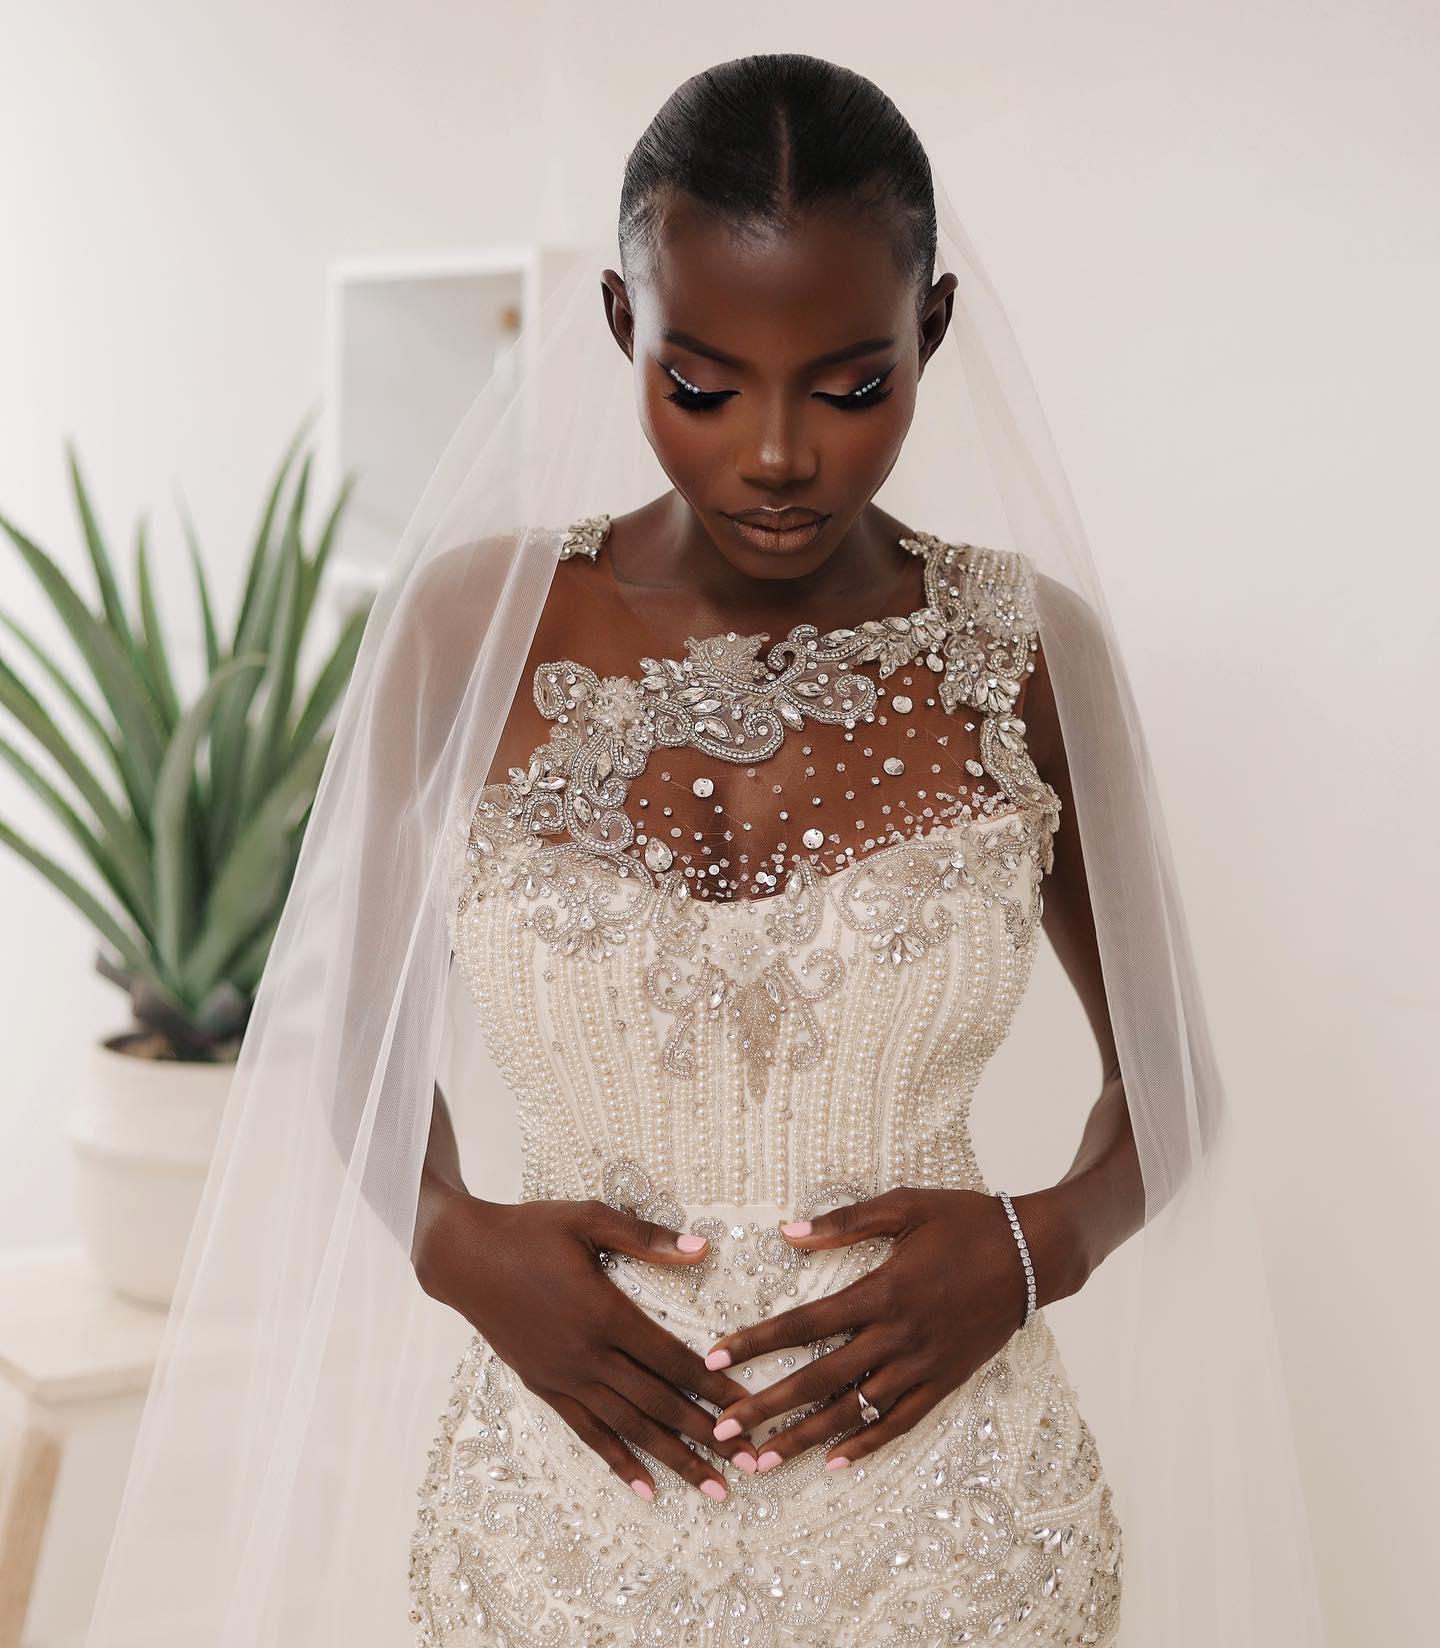 Custom-Made Wedding Gowns in Uganda: A Guide to Top Brands